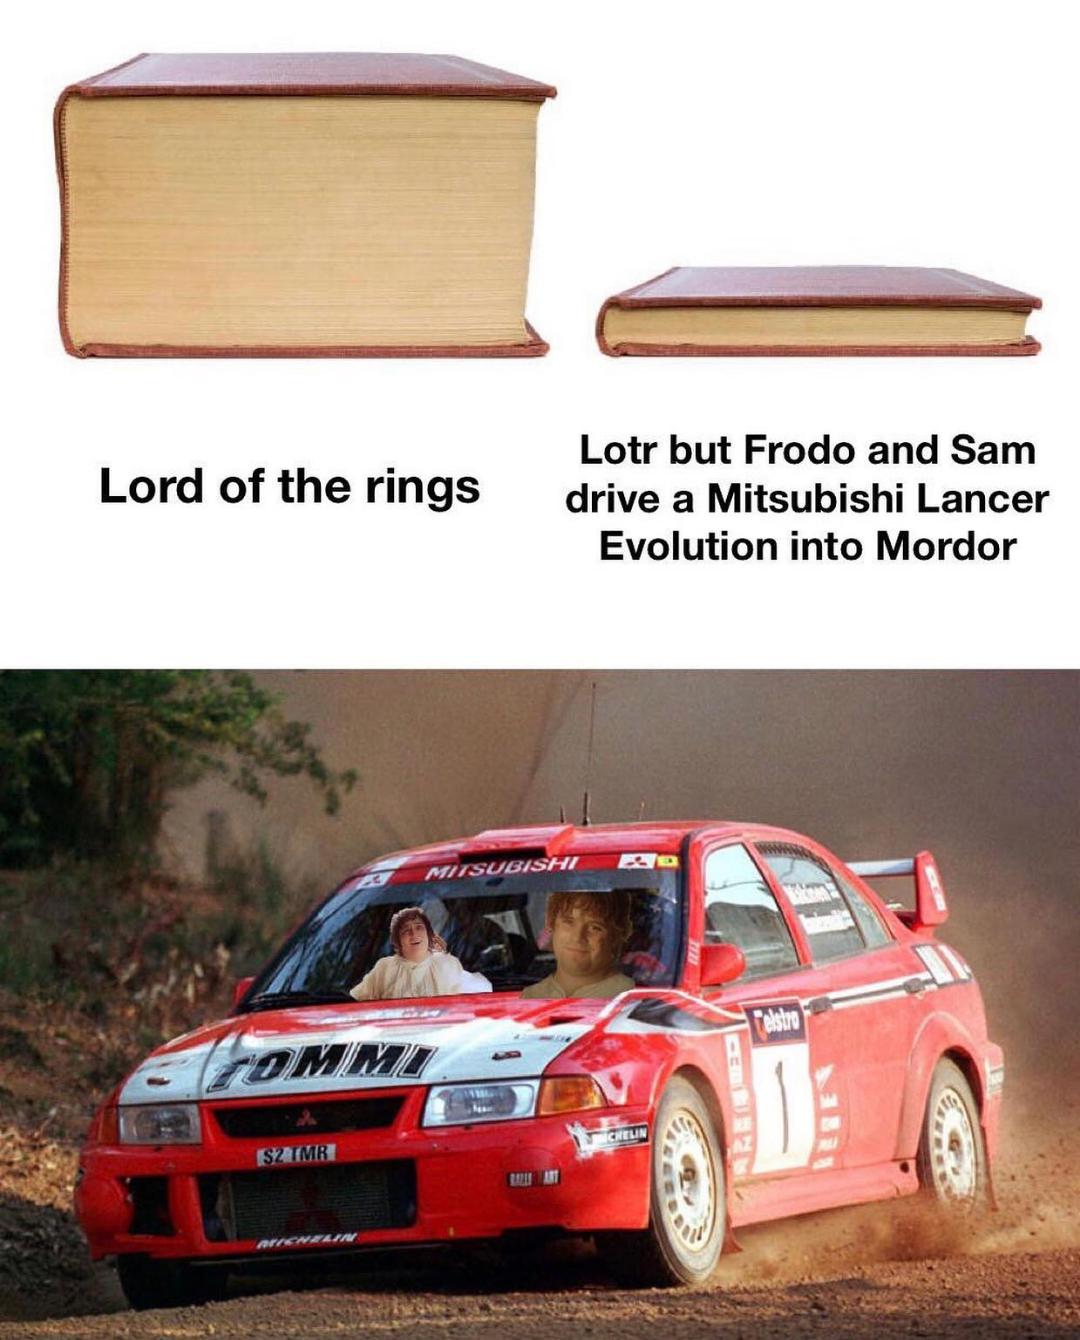 funny memes - dank memes - avatar momo with a gun - Lord of the rings Lotr but Frodo and Sam drive a Mitsubishi Lancer Evolution into Mordor Tommy